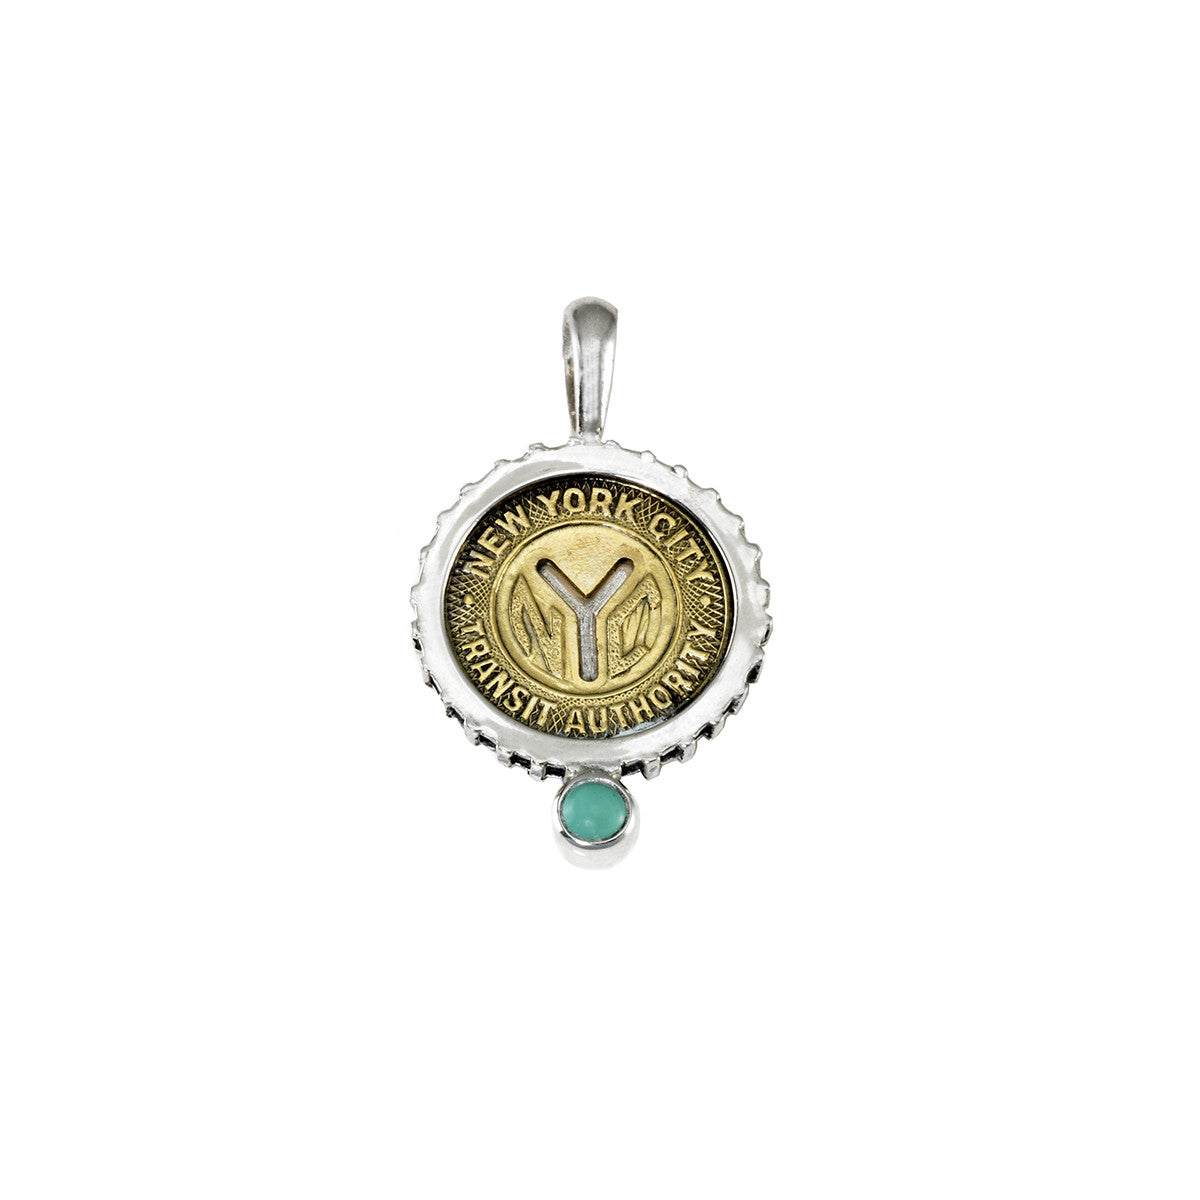 December NYC Authentic Subway Token Turquoise Sterling Silver Charm Necklace - Cynthia Gale New York - 1